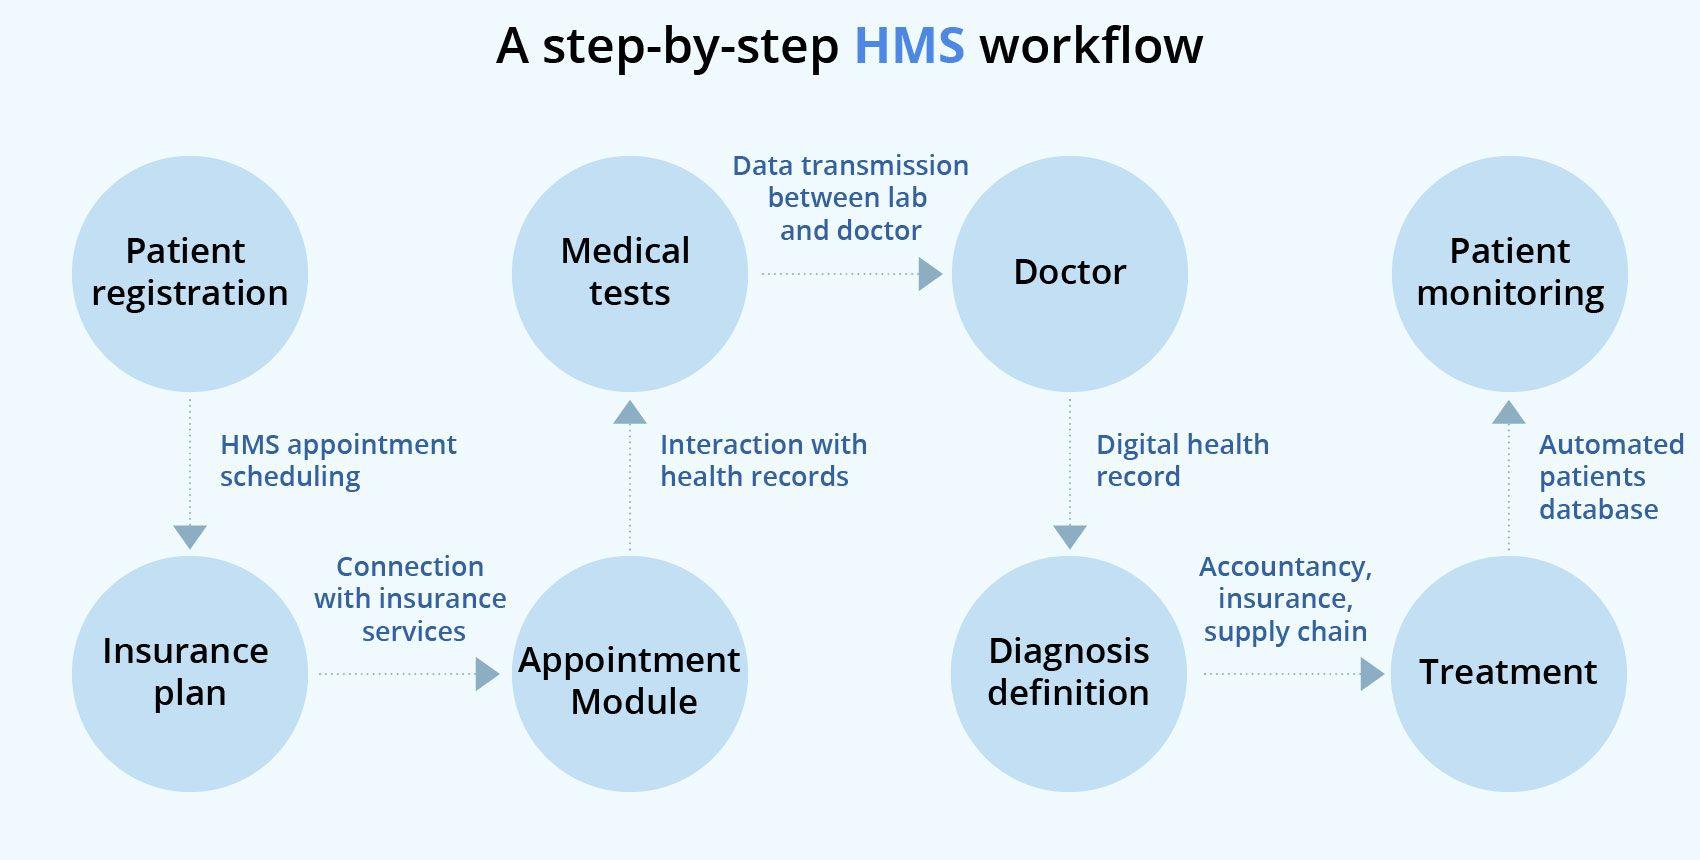 A step-by-step hospital management software workflow